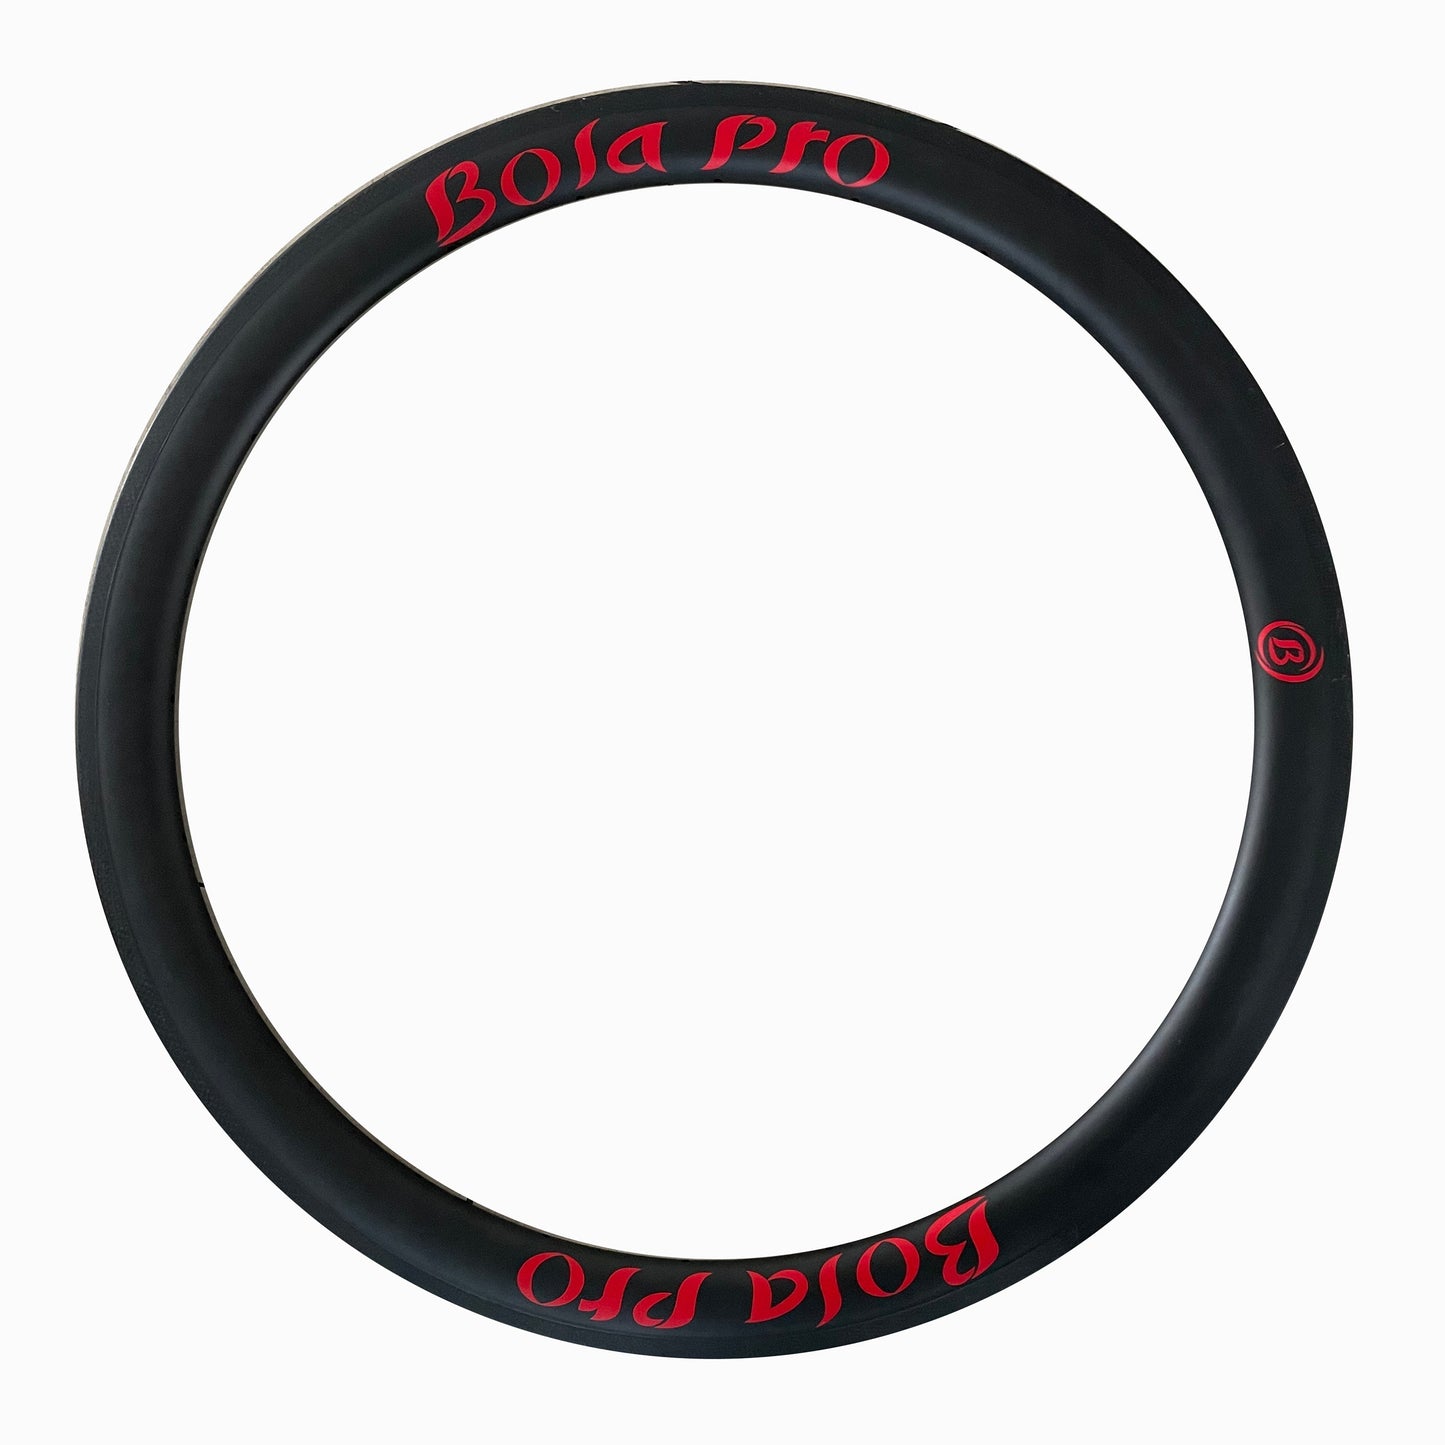 29 inch MTB carbon asymmetric bicycle rim 25mm profile 27mm inner wide for cross-country or all mountain